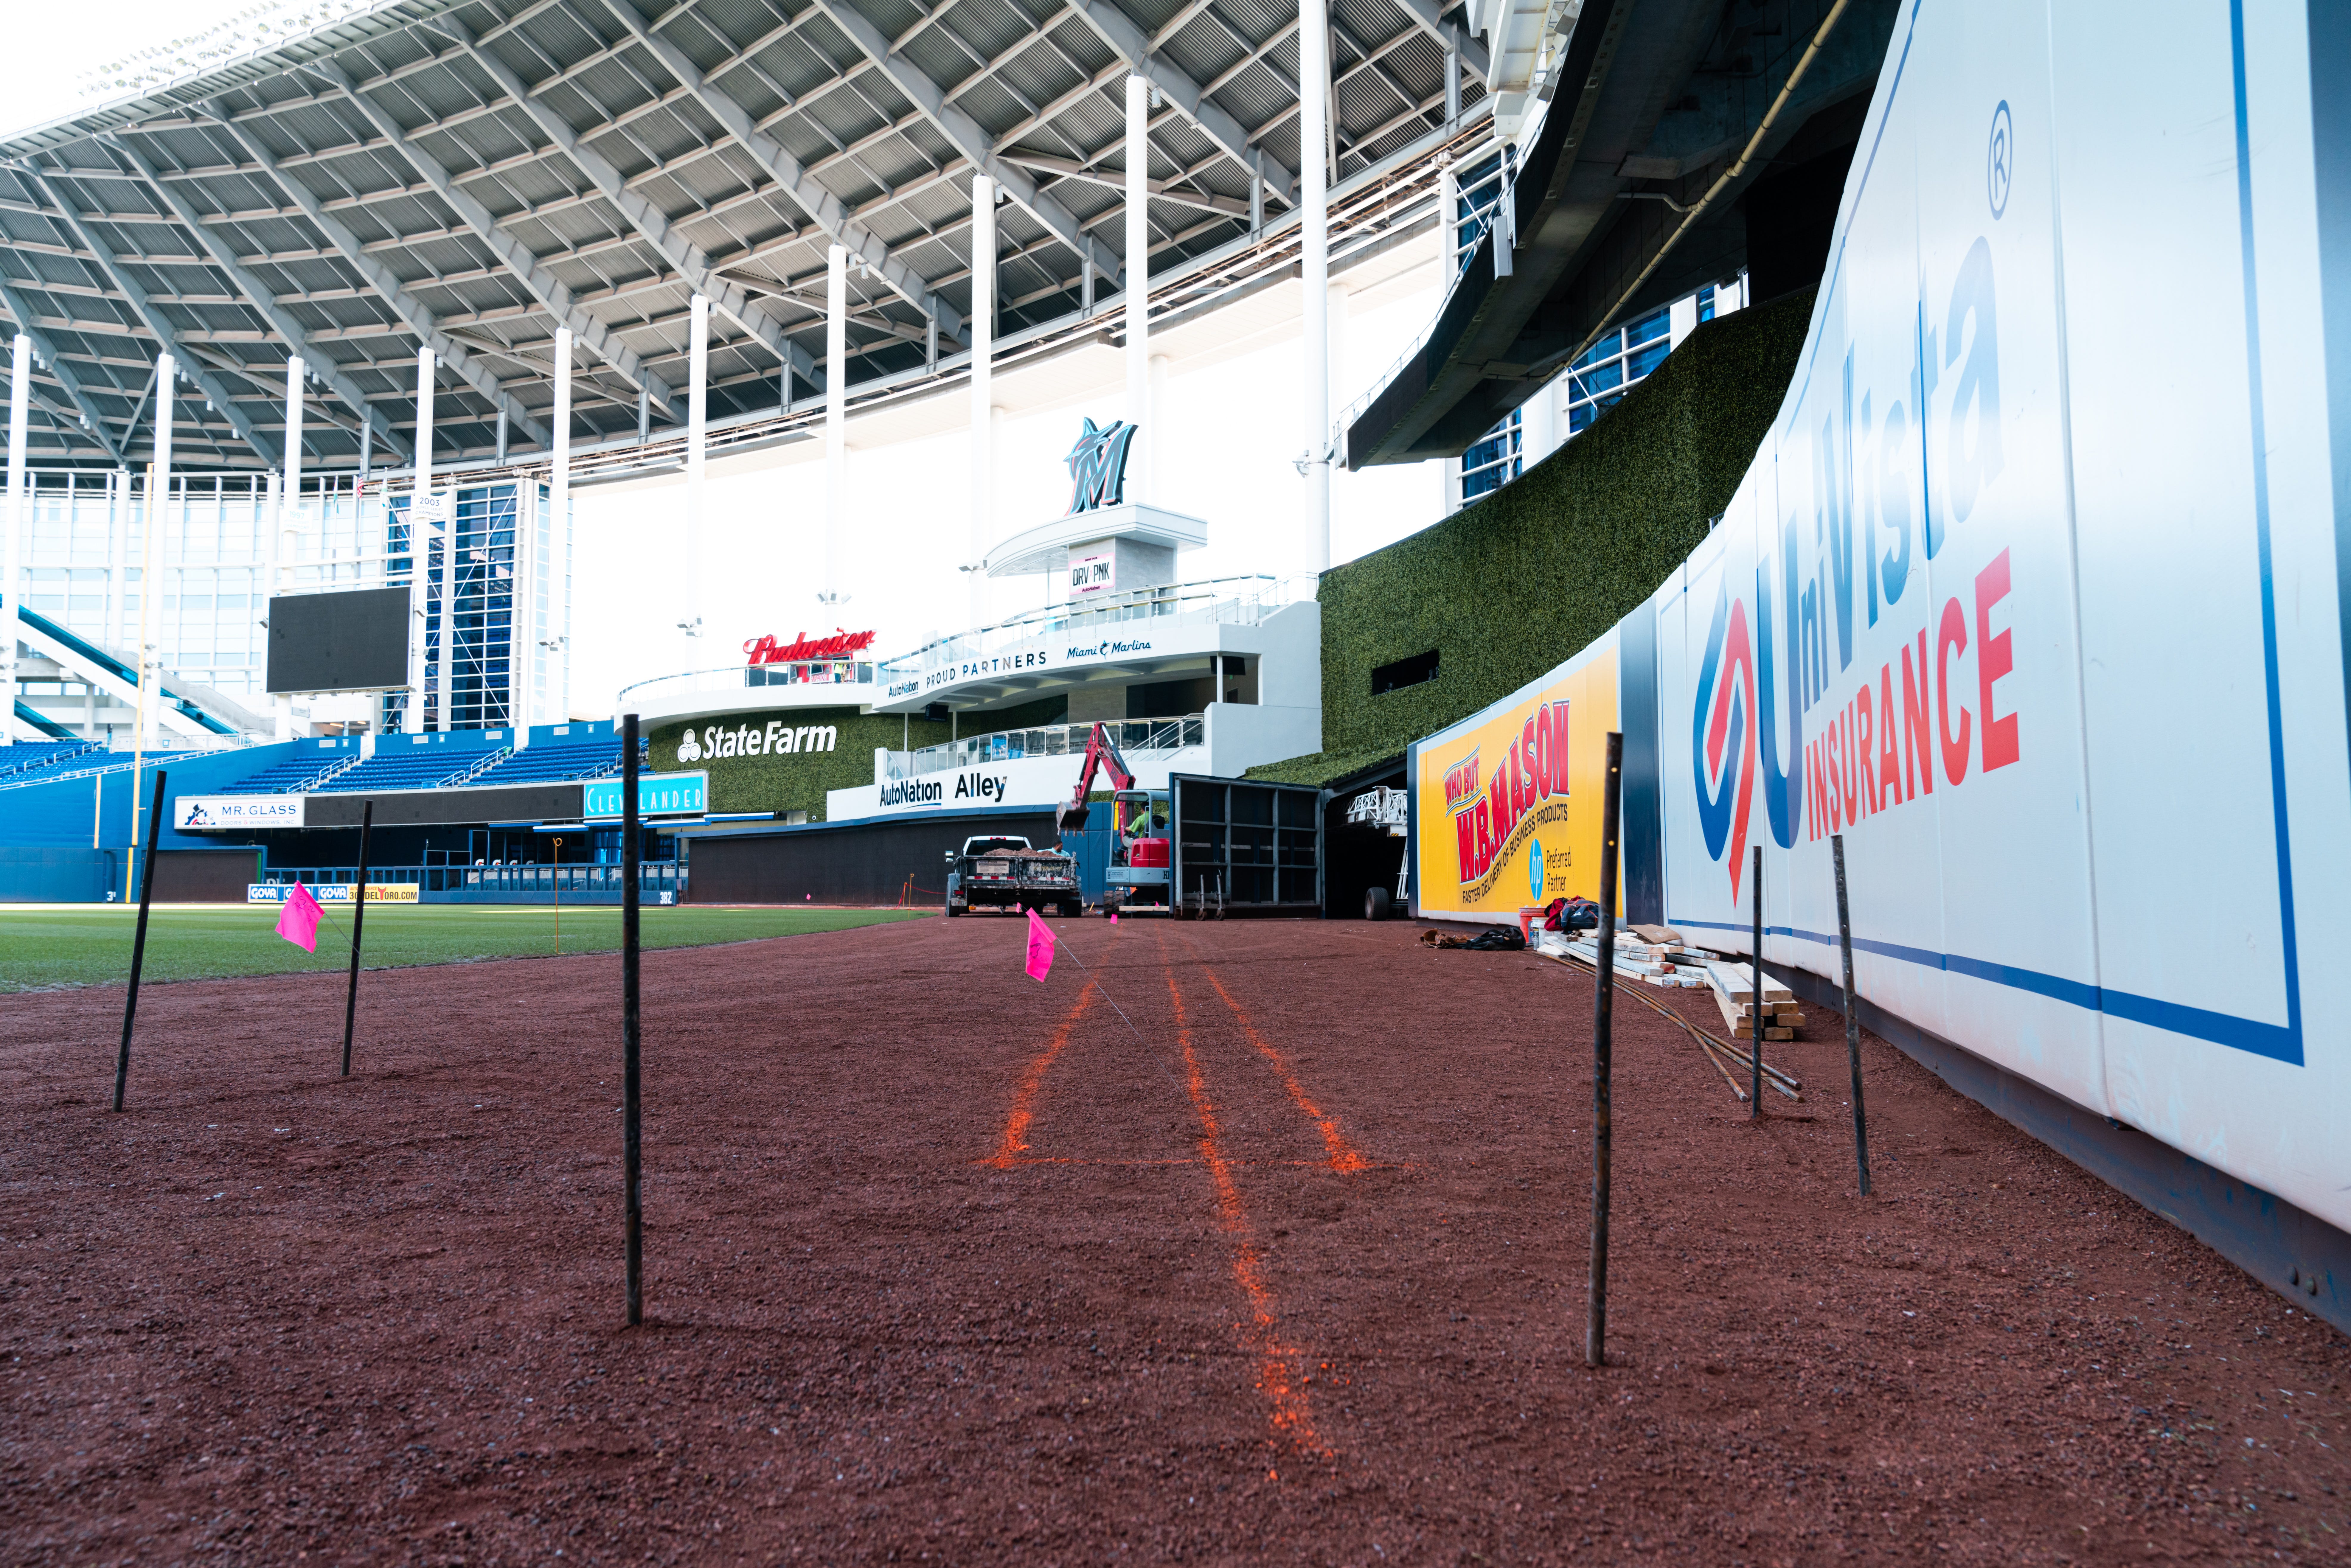 Marlins Park To Sport New Look In 2020, by Marlins Media